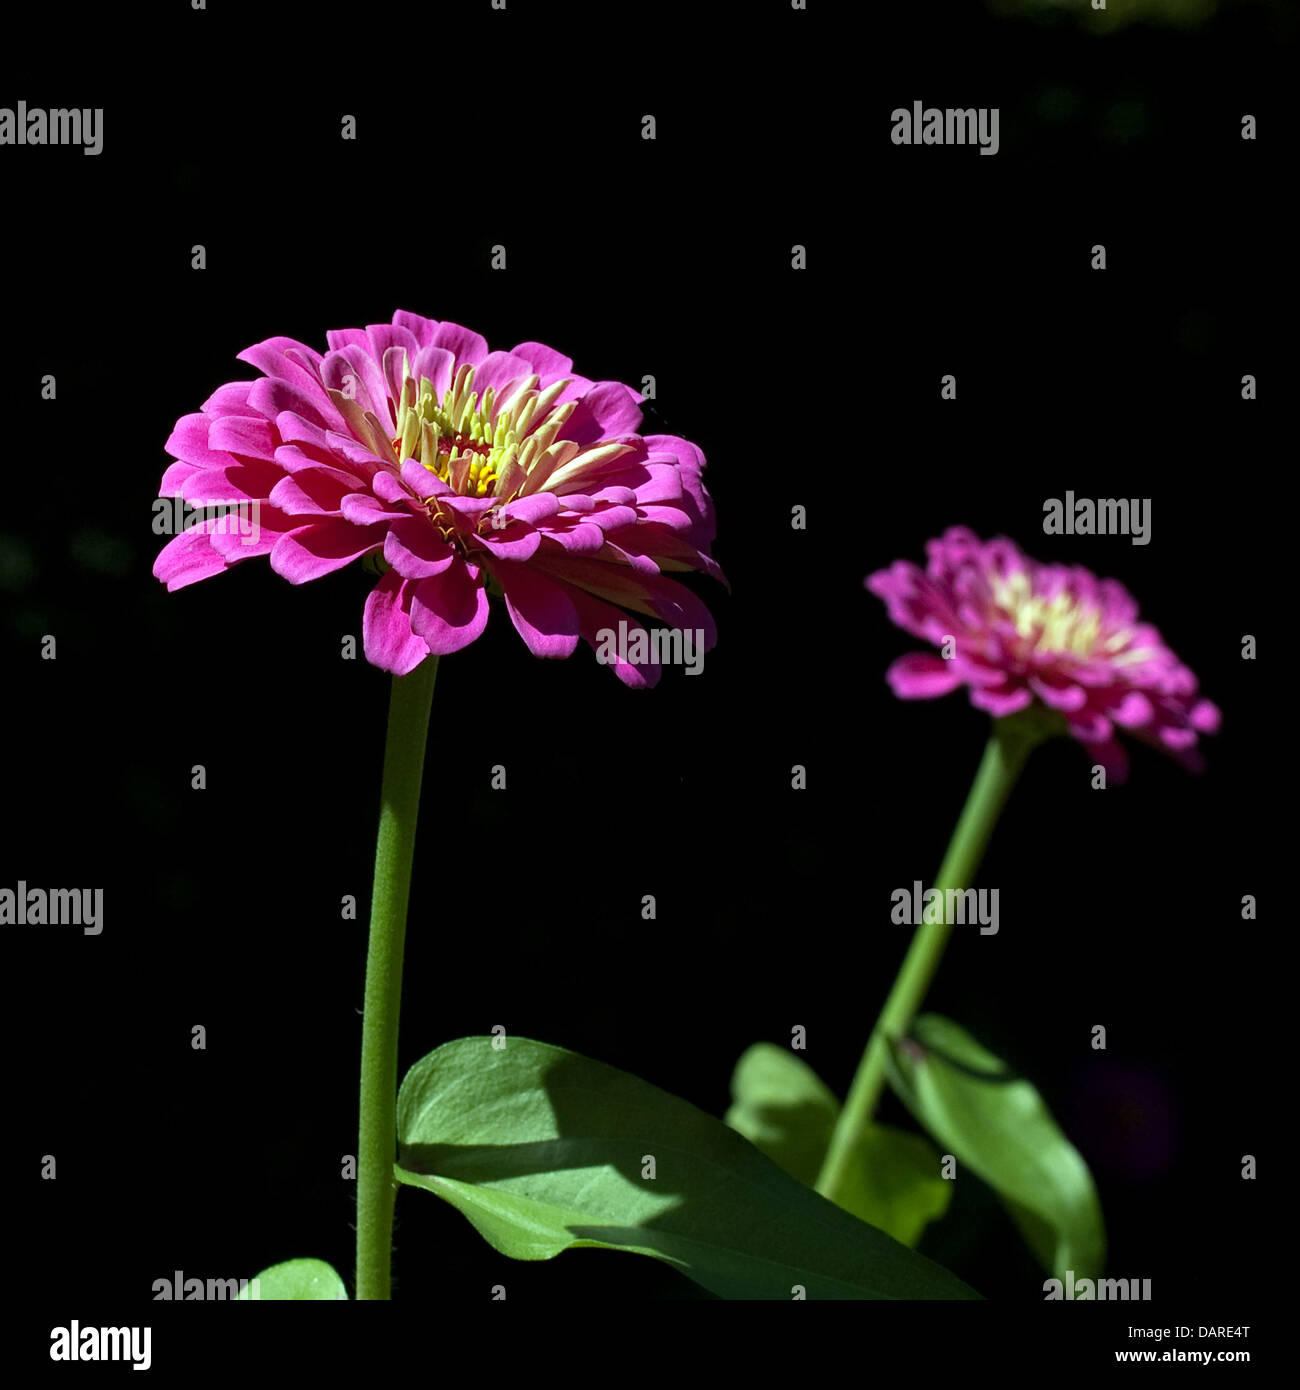 Two fuchsia pink zinnia flowers against a black background. Stock Photo